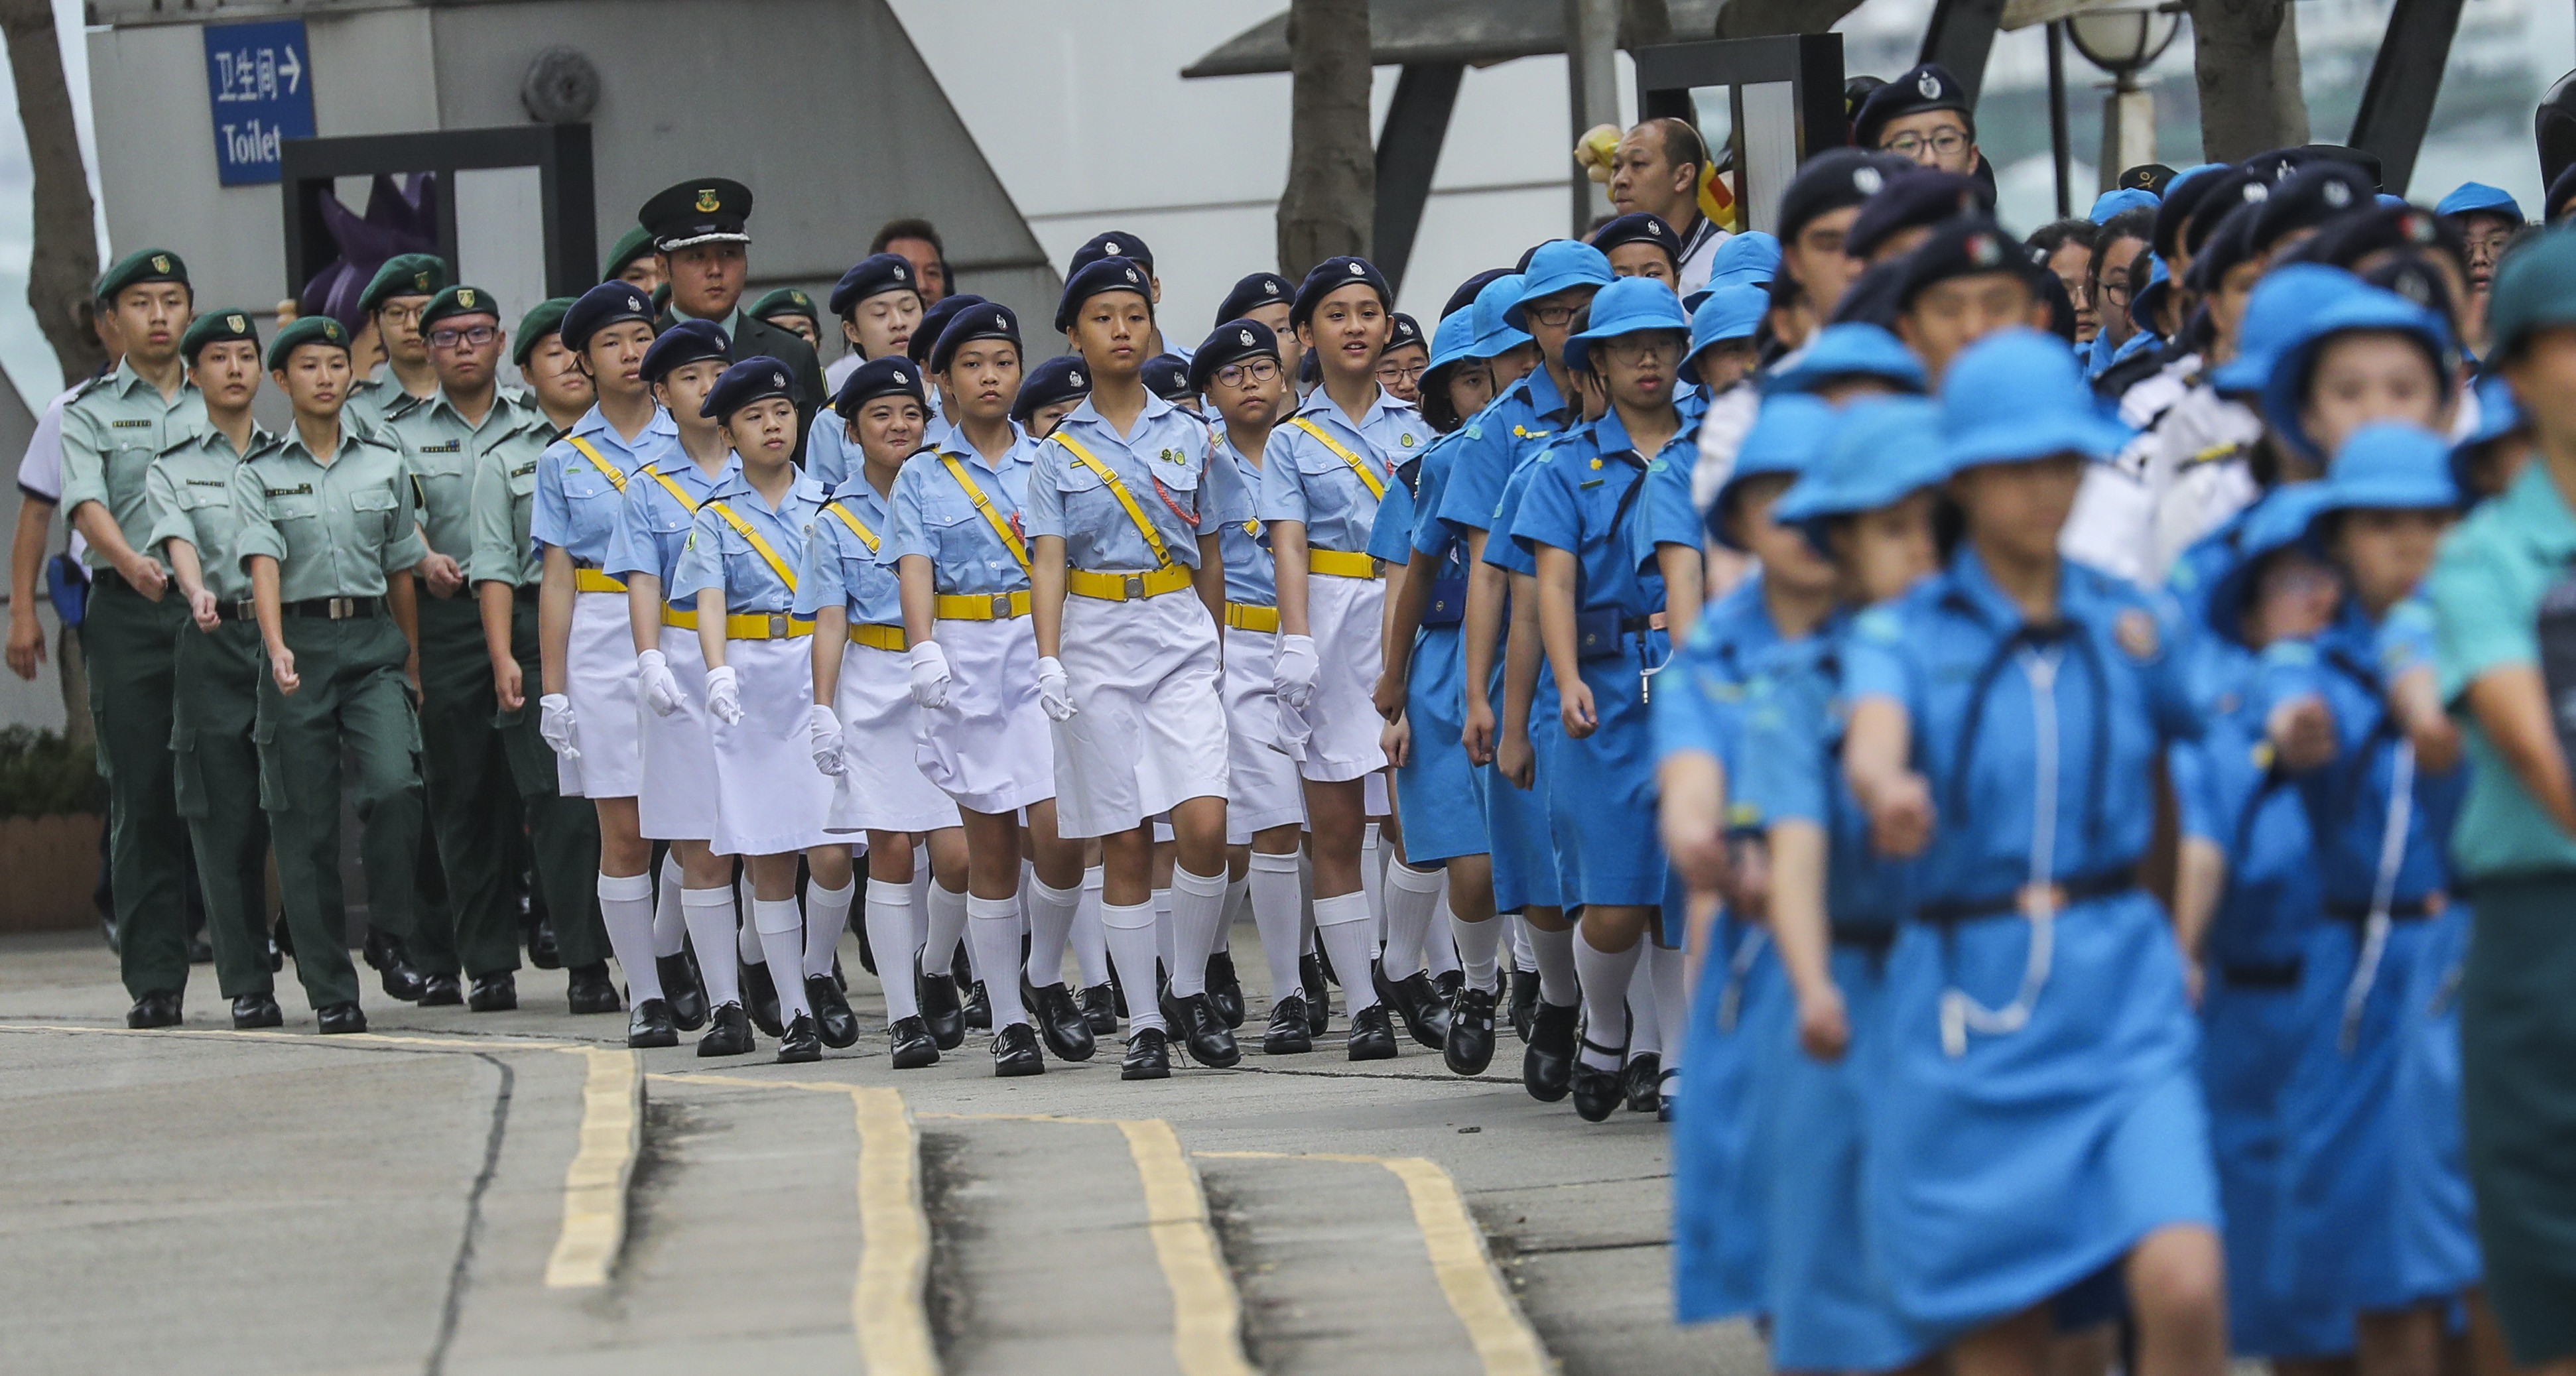 Hong Kong Cadet Groups Switch From British Military Drills To